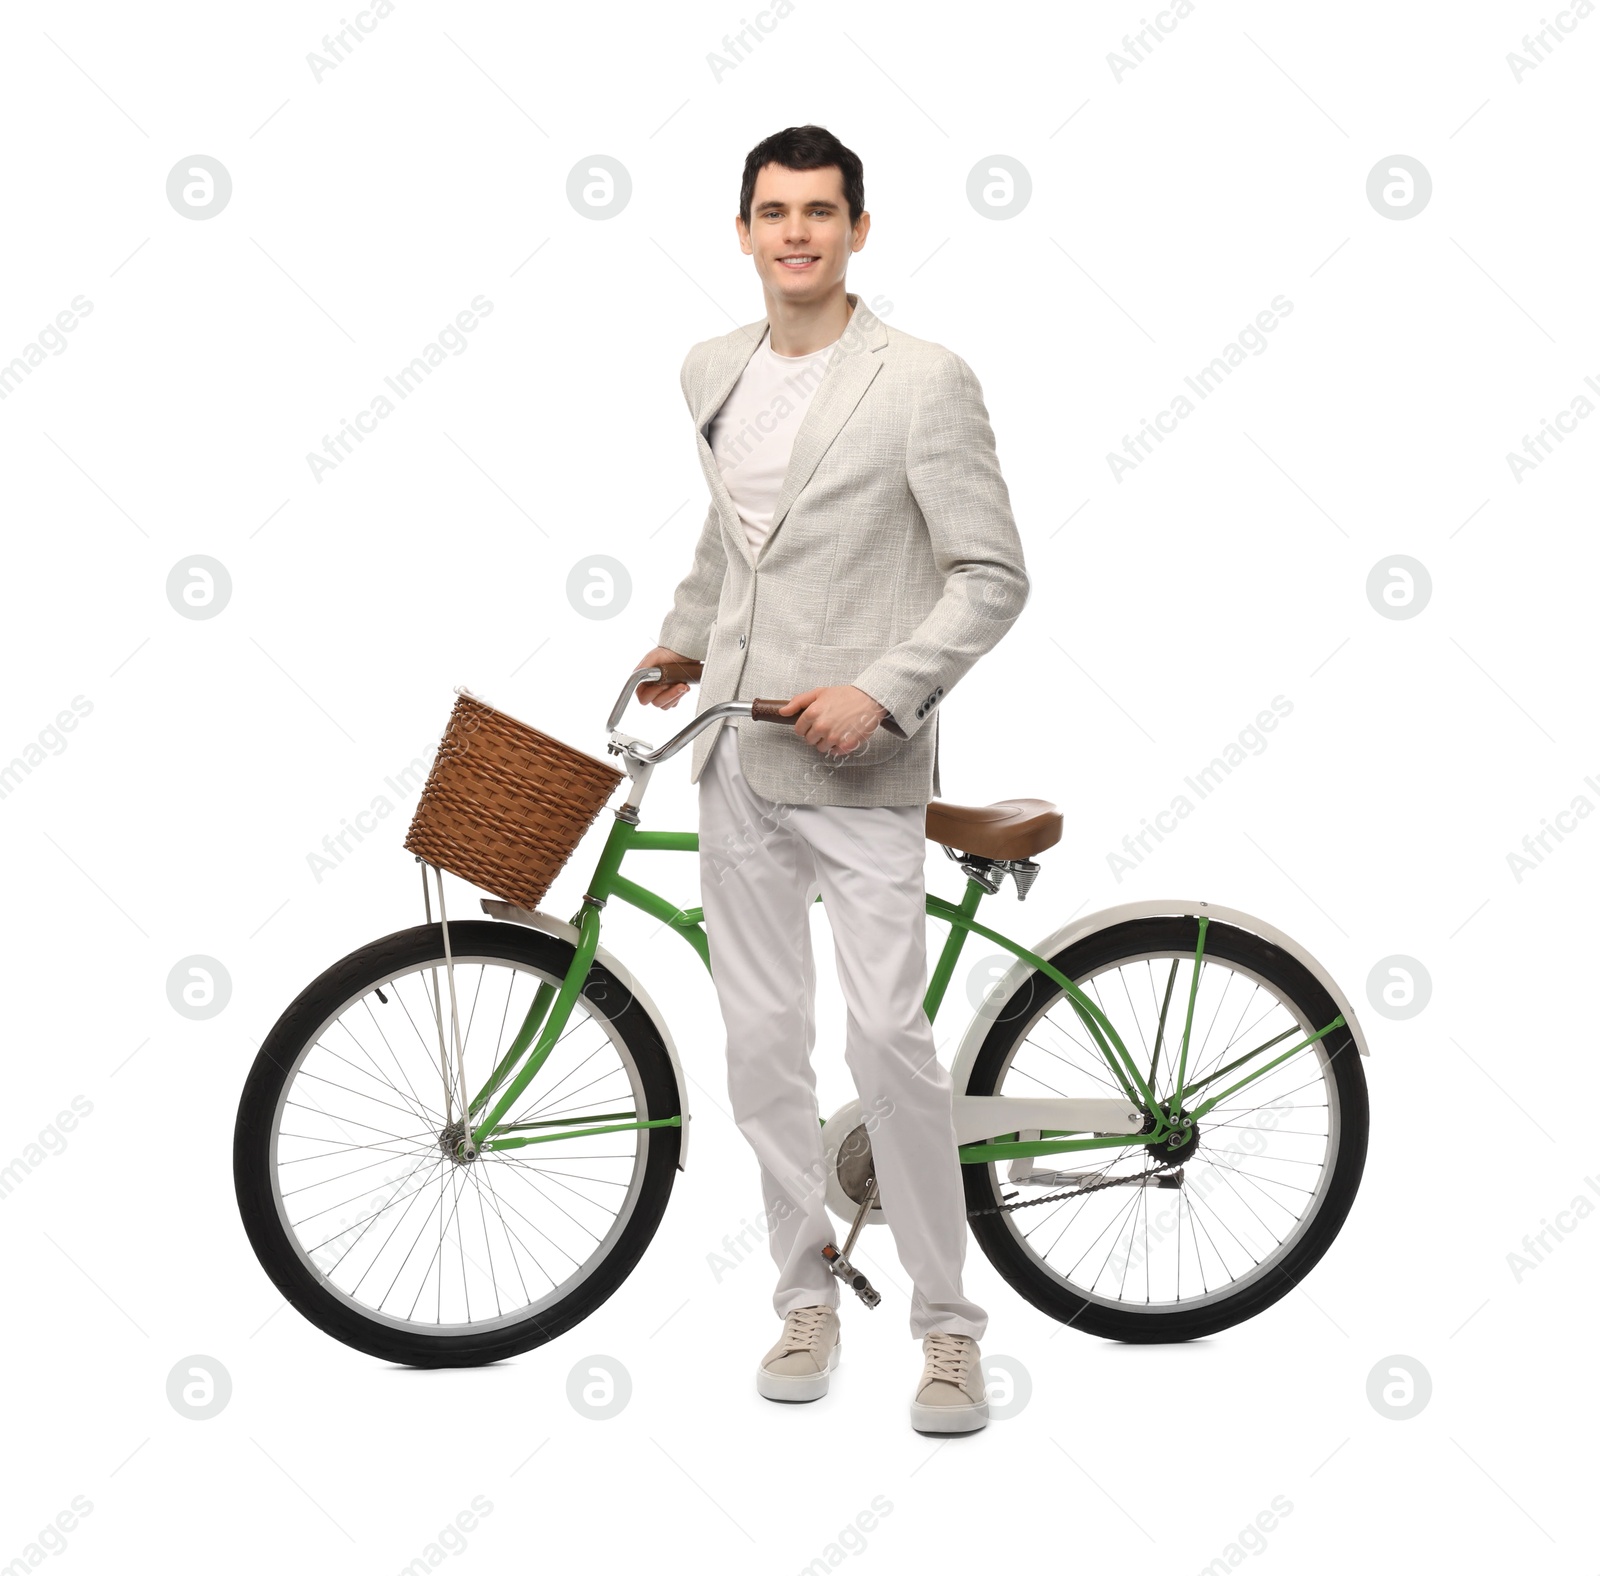 Photo of Smiling man with bicycle and basket isolated on white